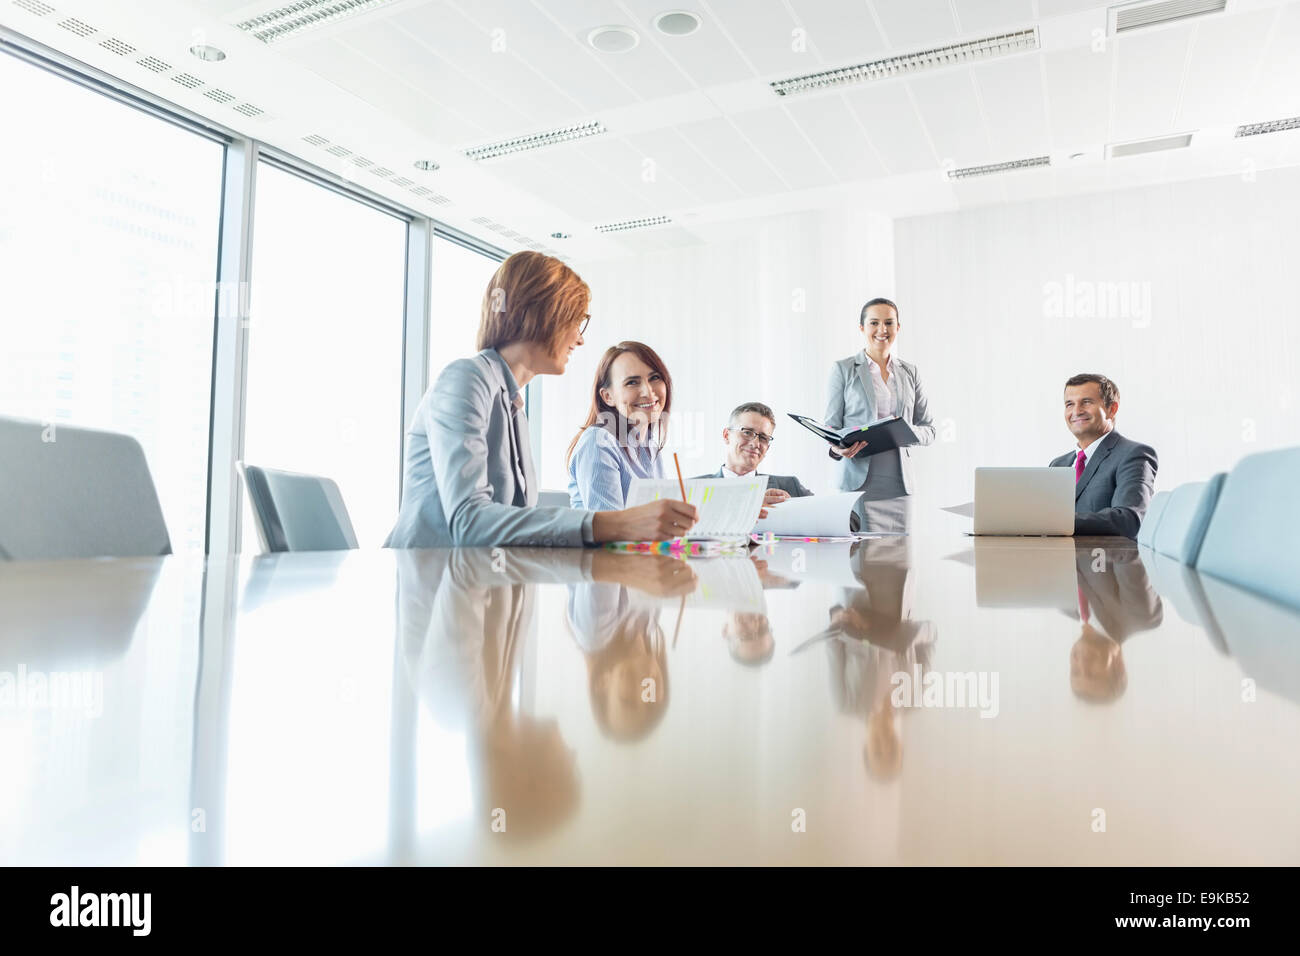 Businesspeople in conference room Stock Photo